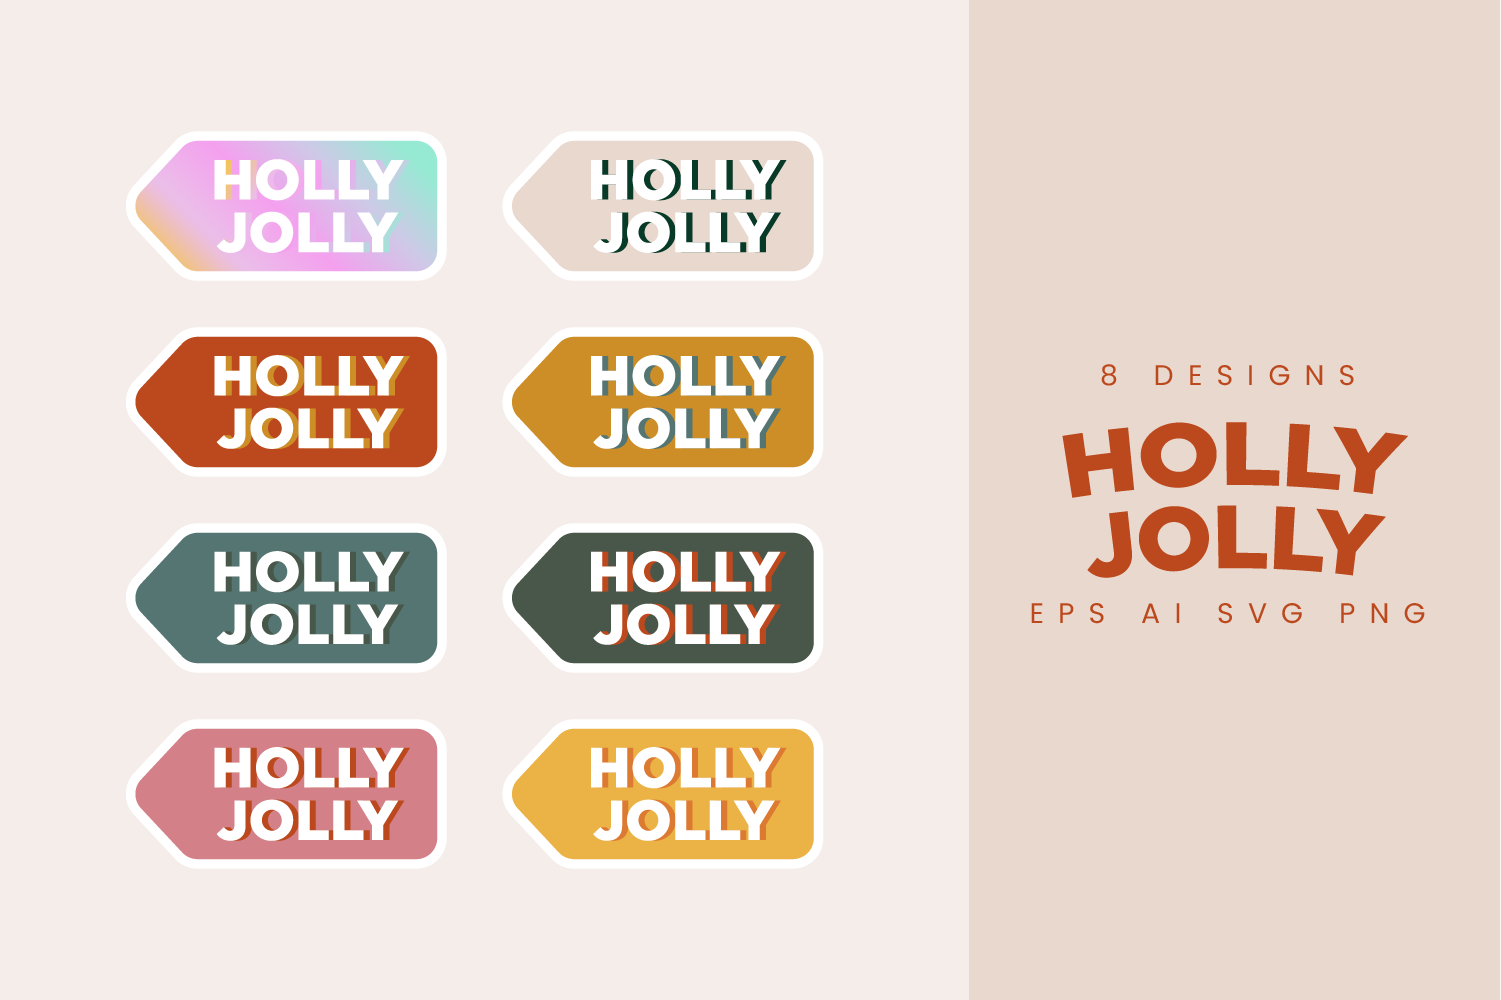 Cute Christmas Tag Holly Jolly Bundle facebook preview.